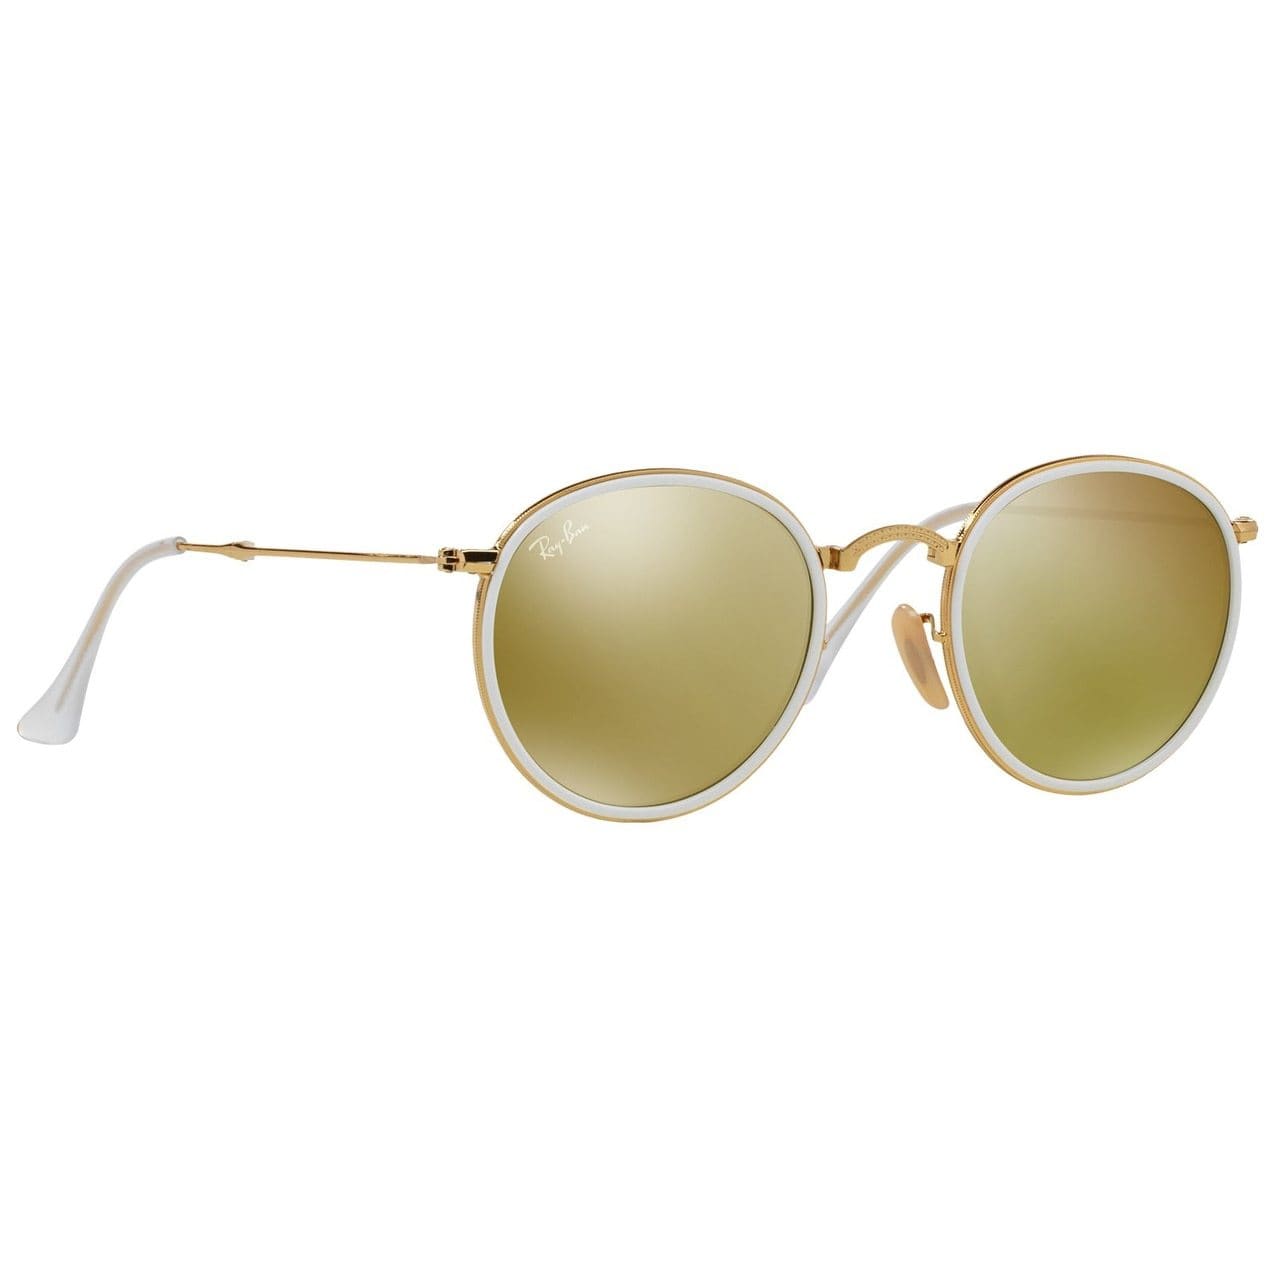 Ray-Ban RB3517 001/93 Round Folding Yellow Flash Lens Gold Metal Frame Sunglasses 8053672233773